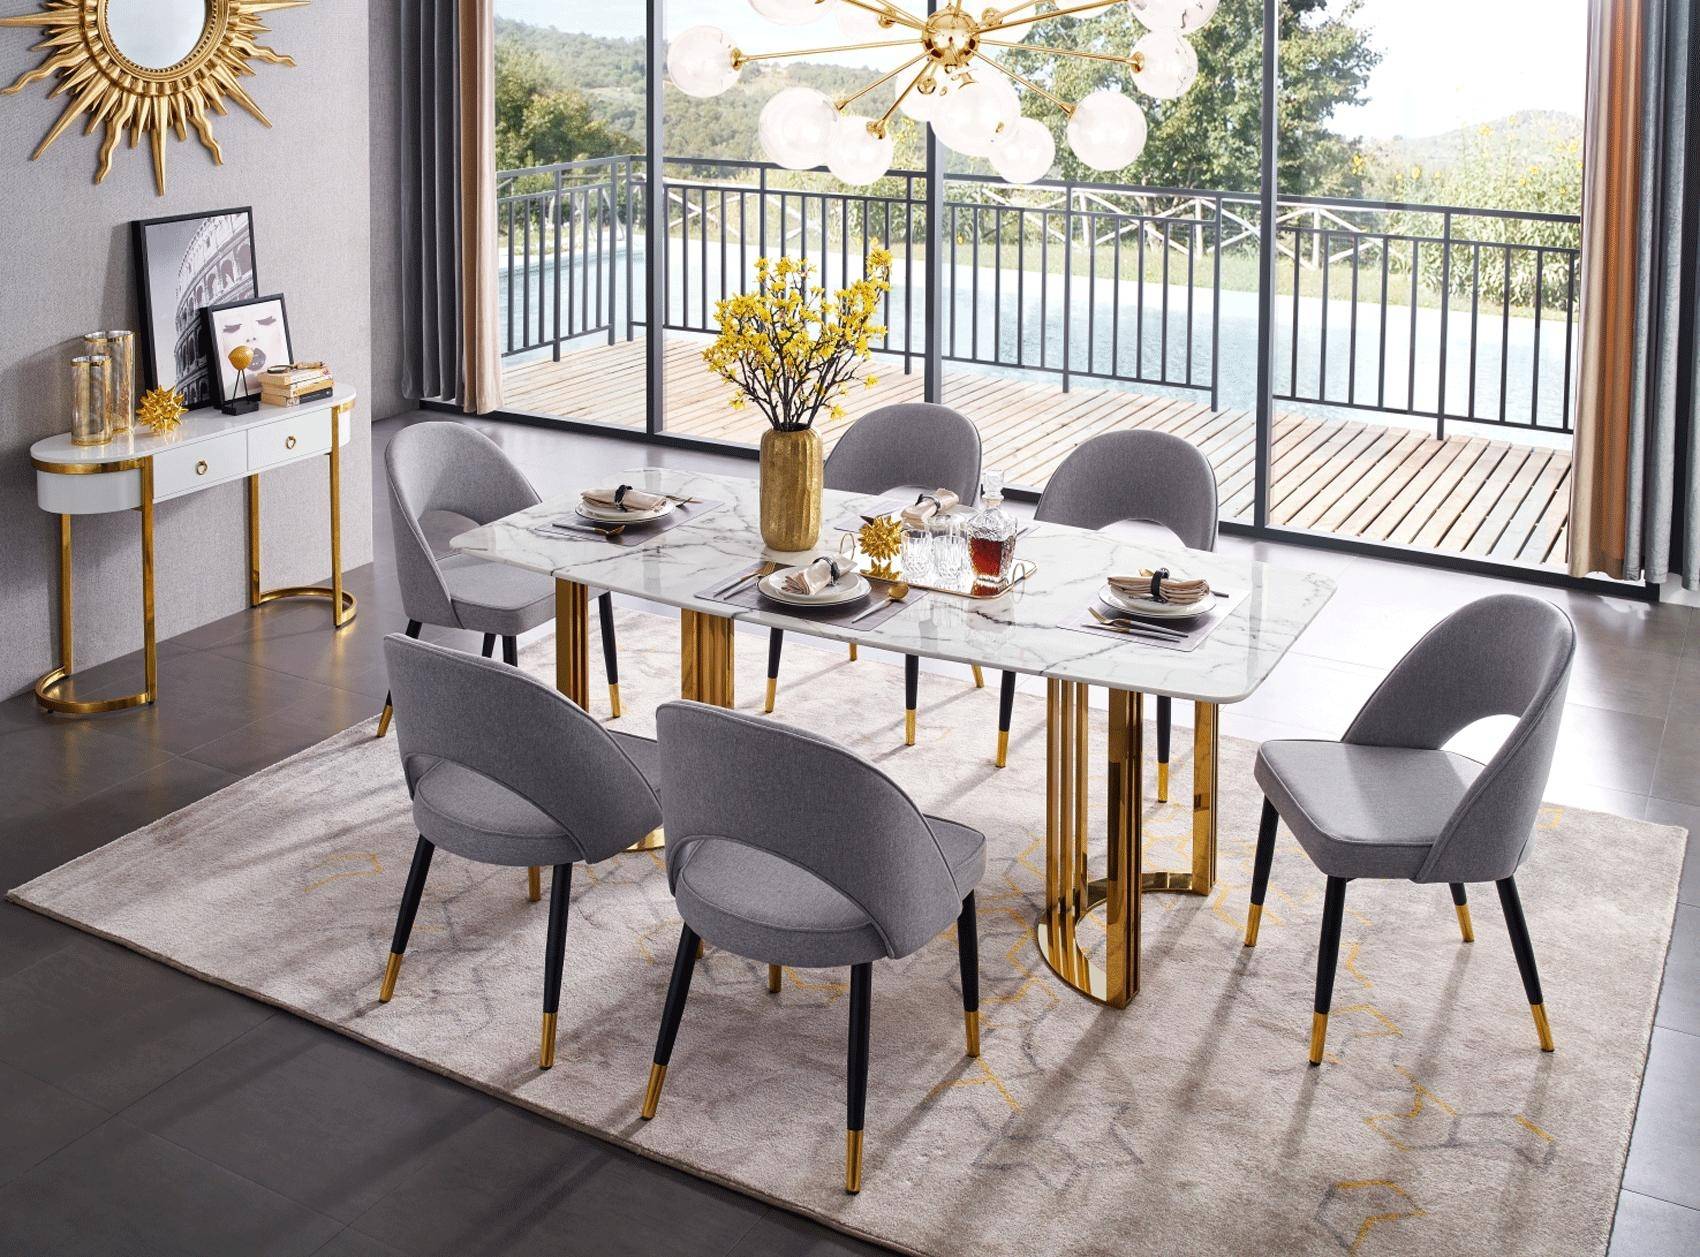 Buy Esf 131 Dining Sets 8 Pcs In Gray Marble Online